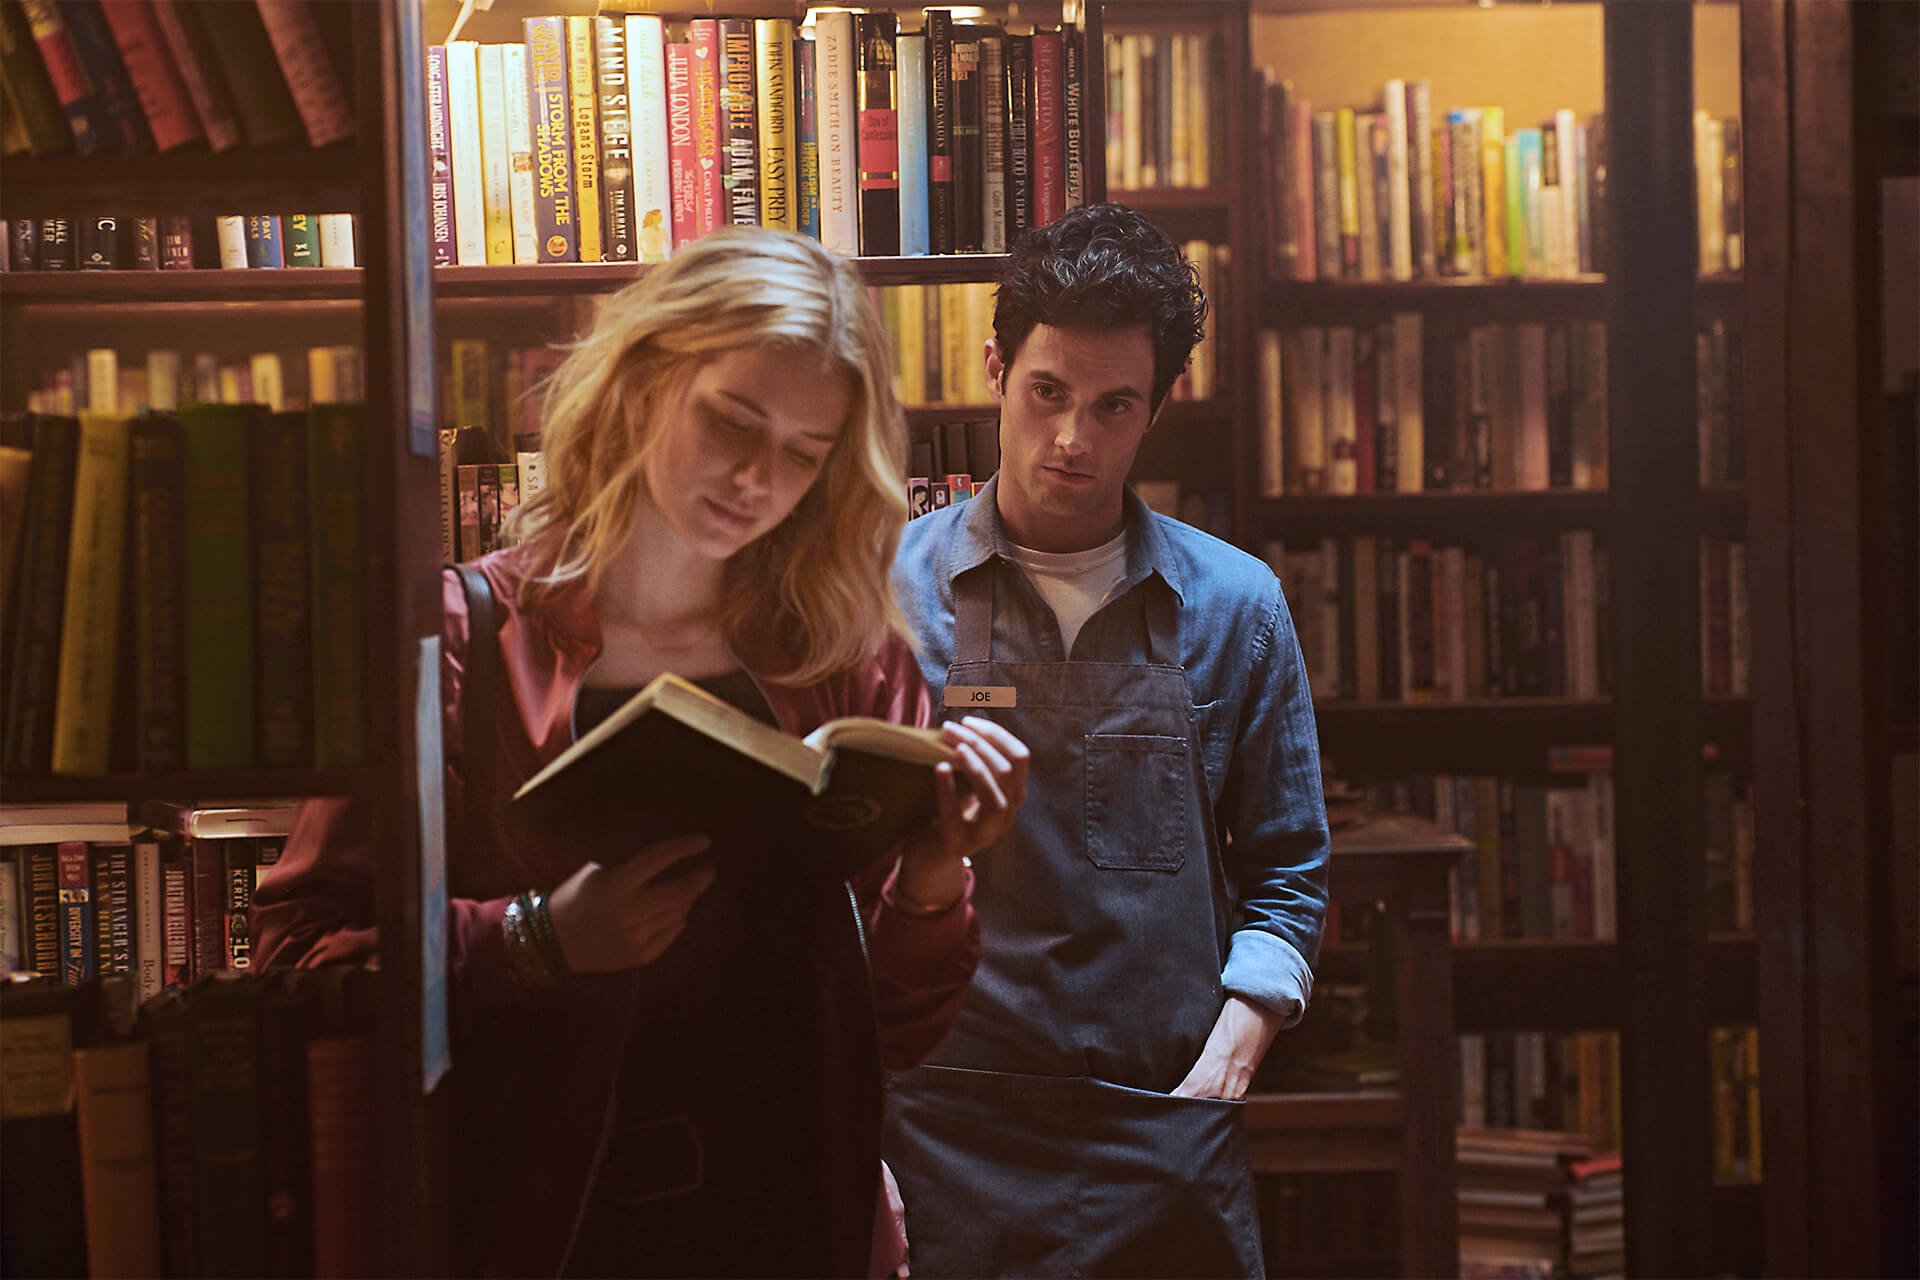 Penn Badgley as Joe Goldberg watches Elizabeth Lail as Guinevere Beck reading in the bookstore on 'You' Season 1.